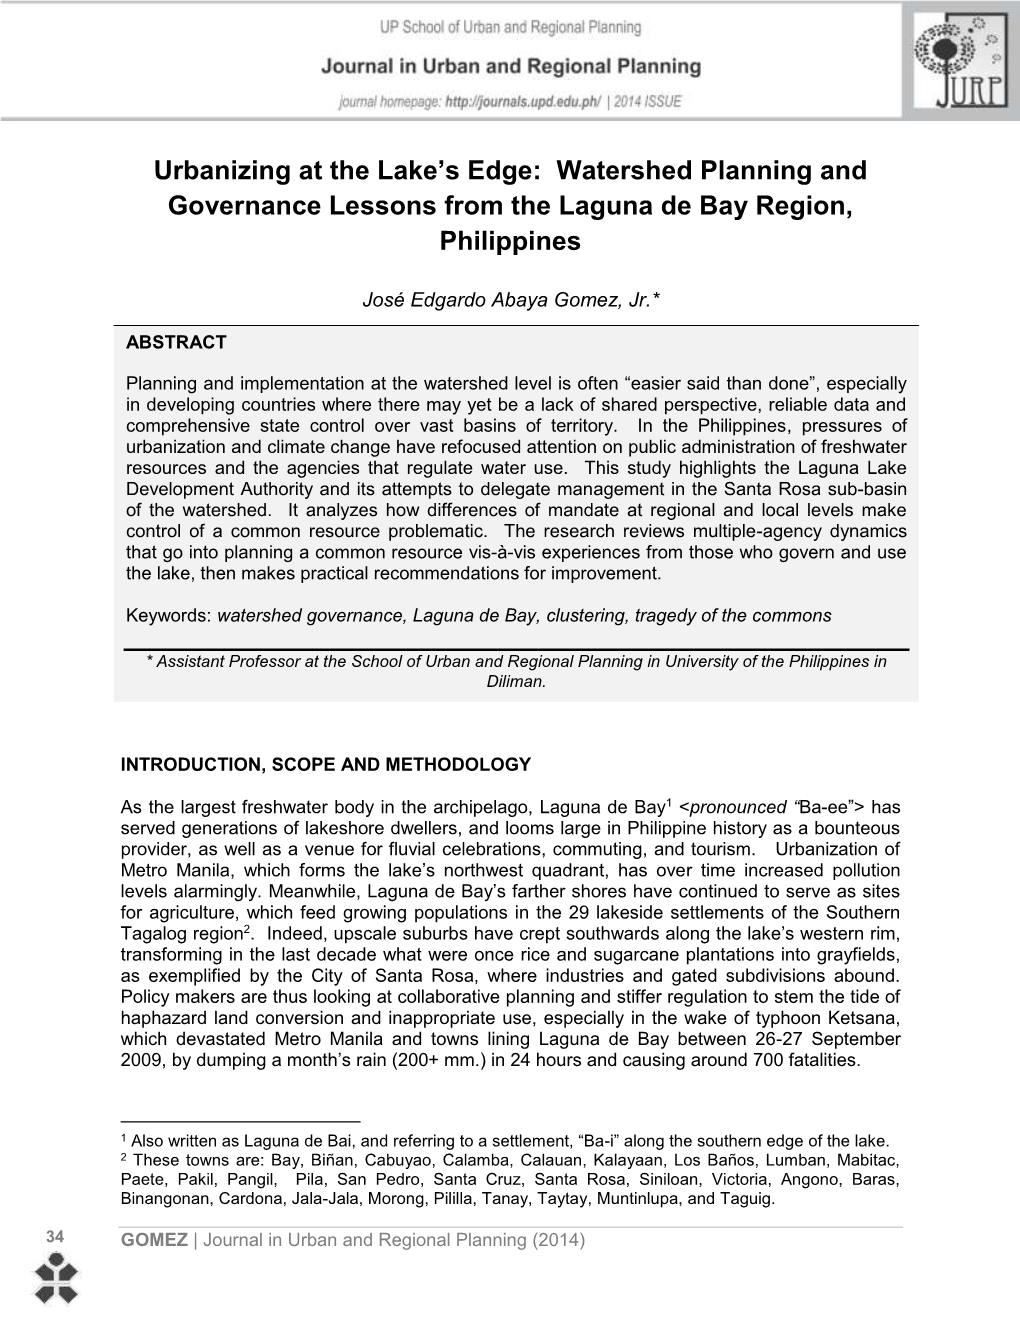 Urbanizing at the Lake's Edge: Watershed Planning And